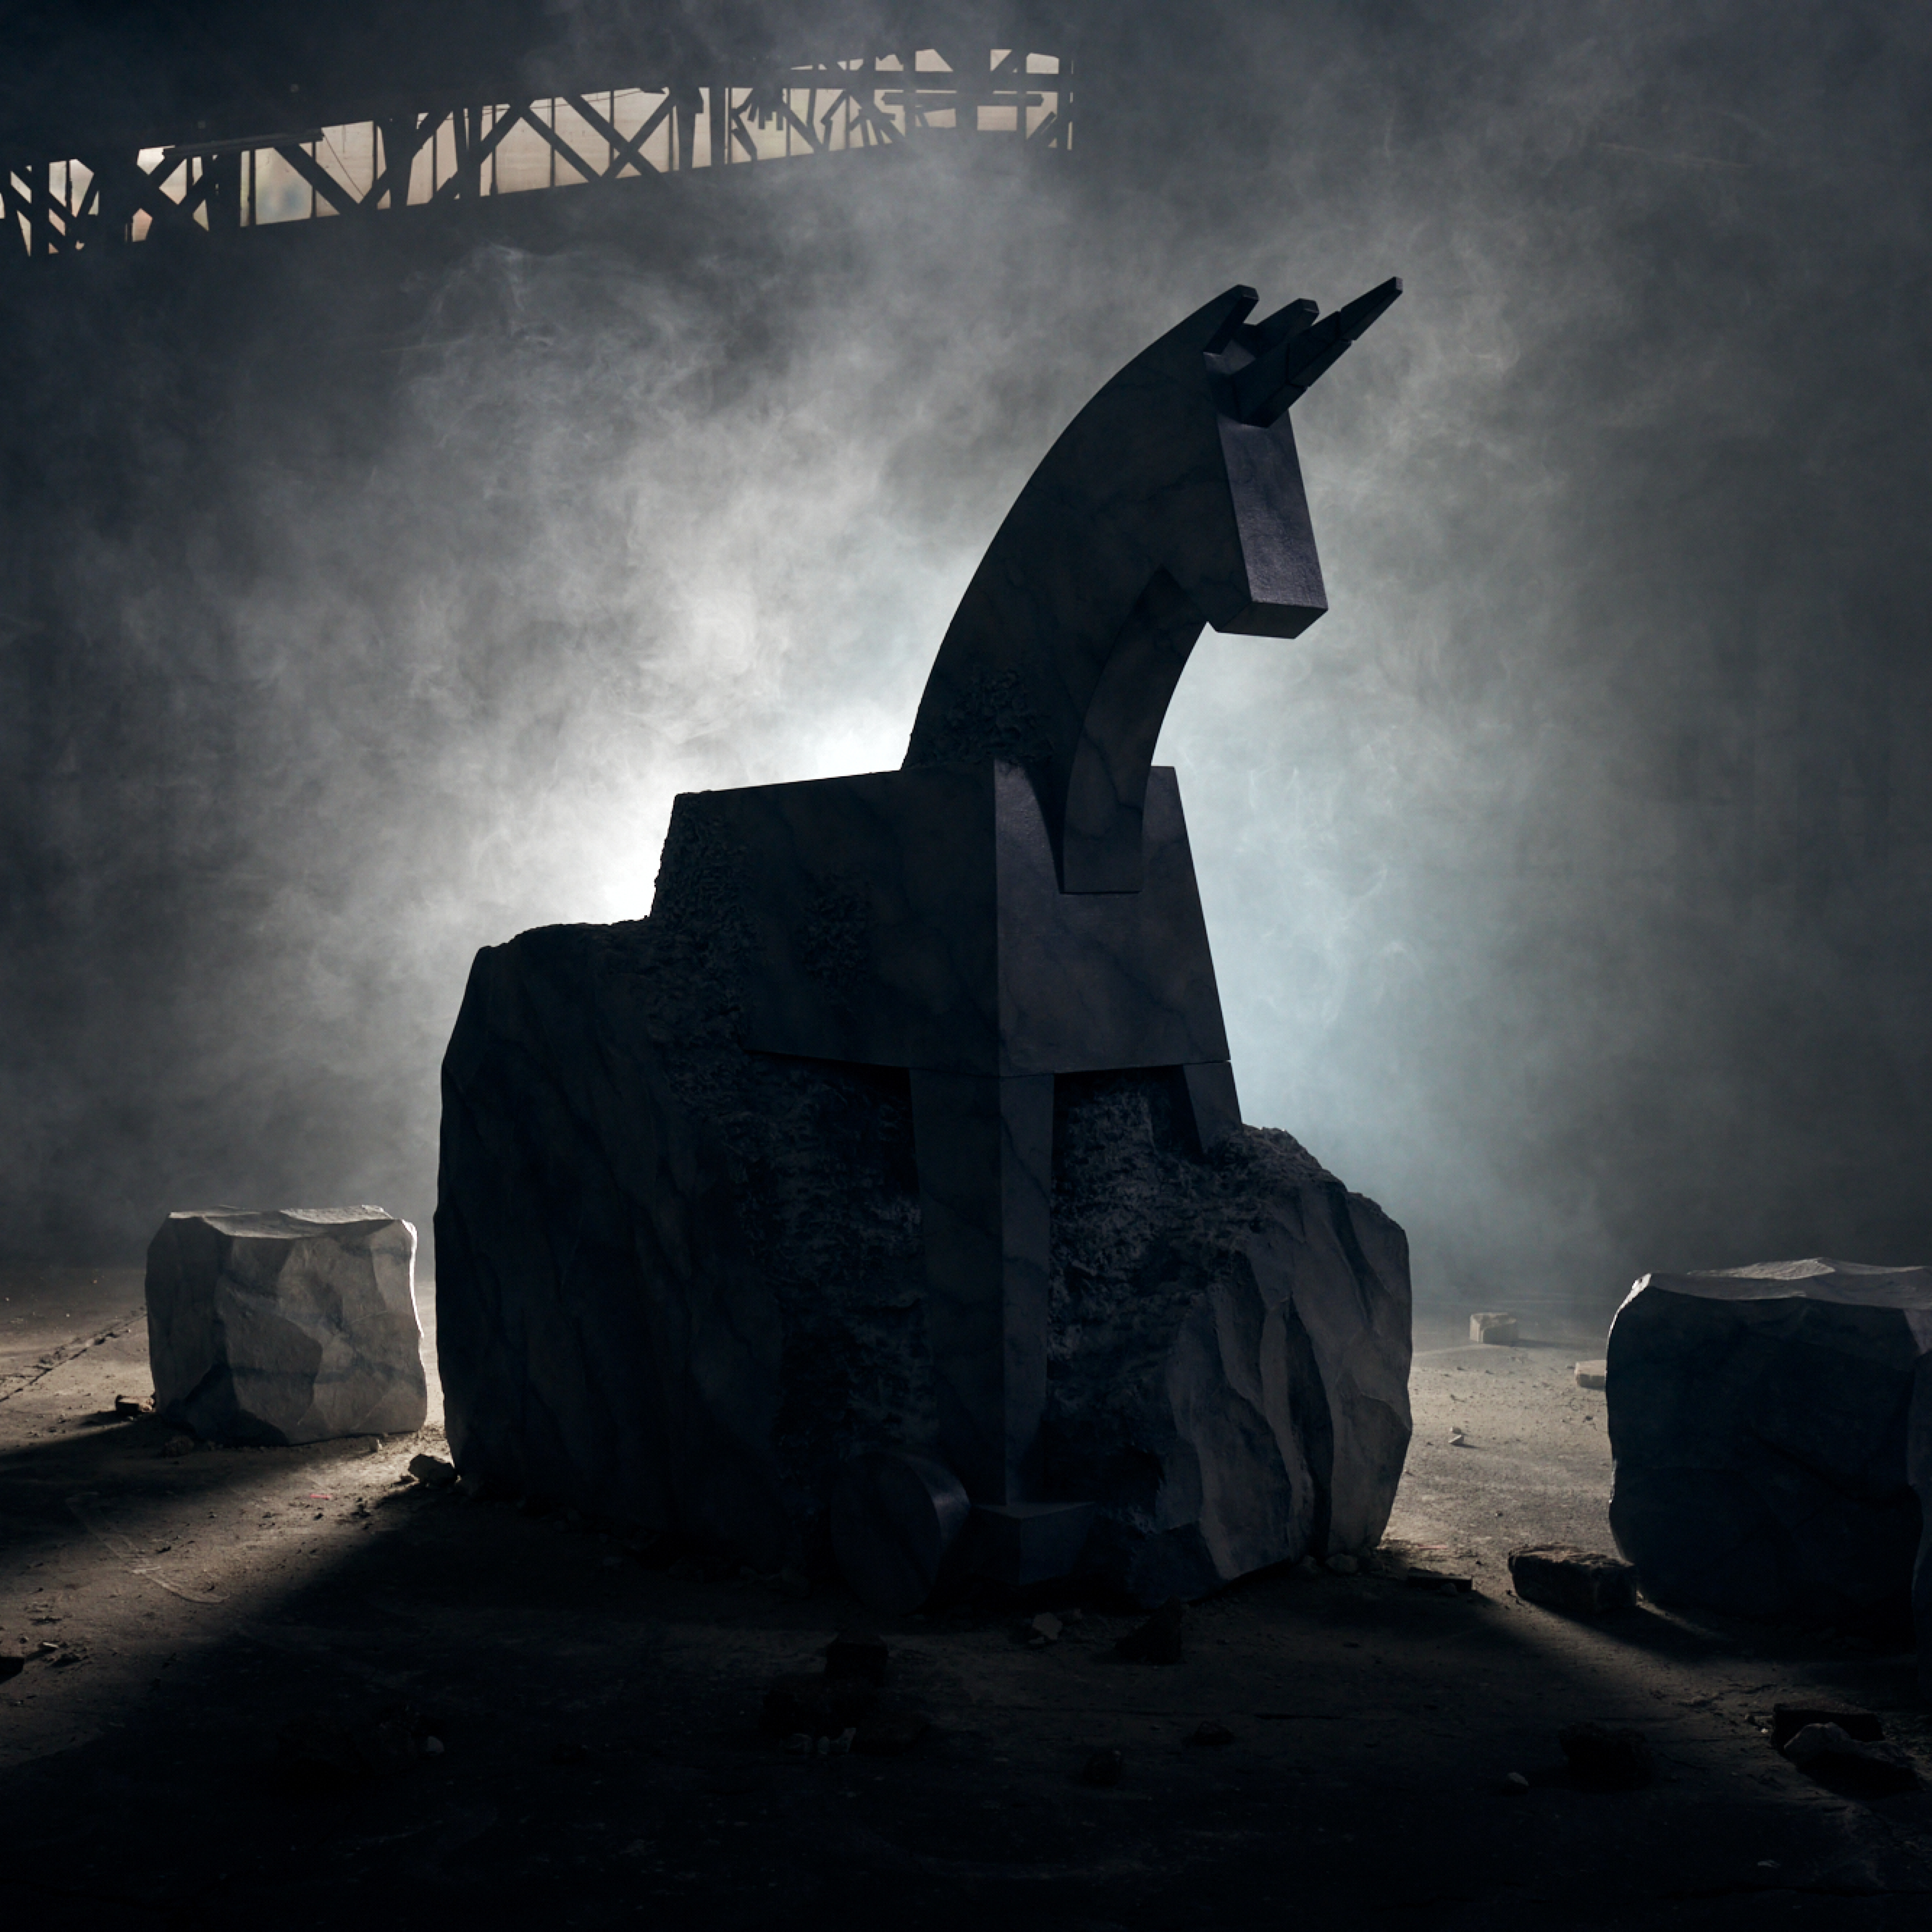 Image showing a sculpture of a Trojan horse, Jung von Matt's brand logo, emerging from a stone-like rock in the middle of a dark room.